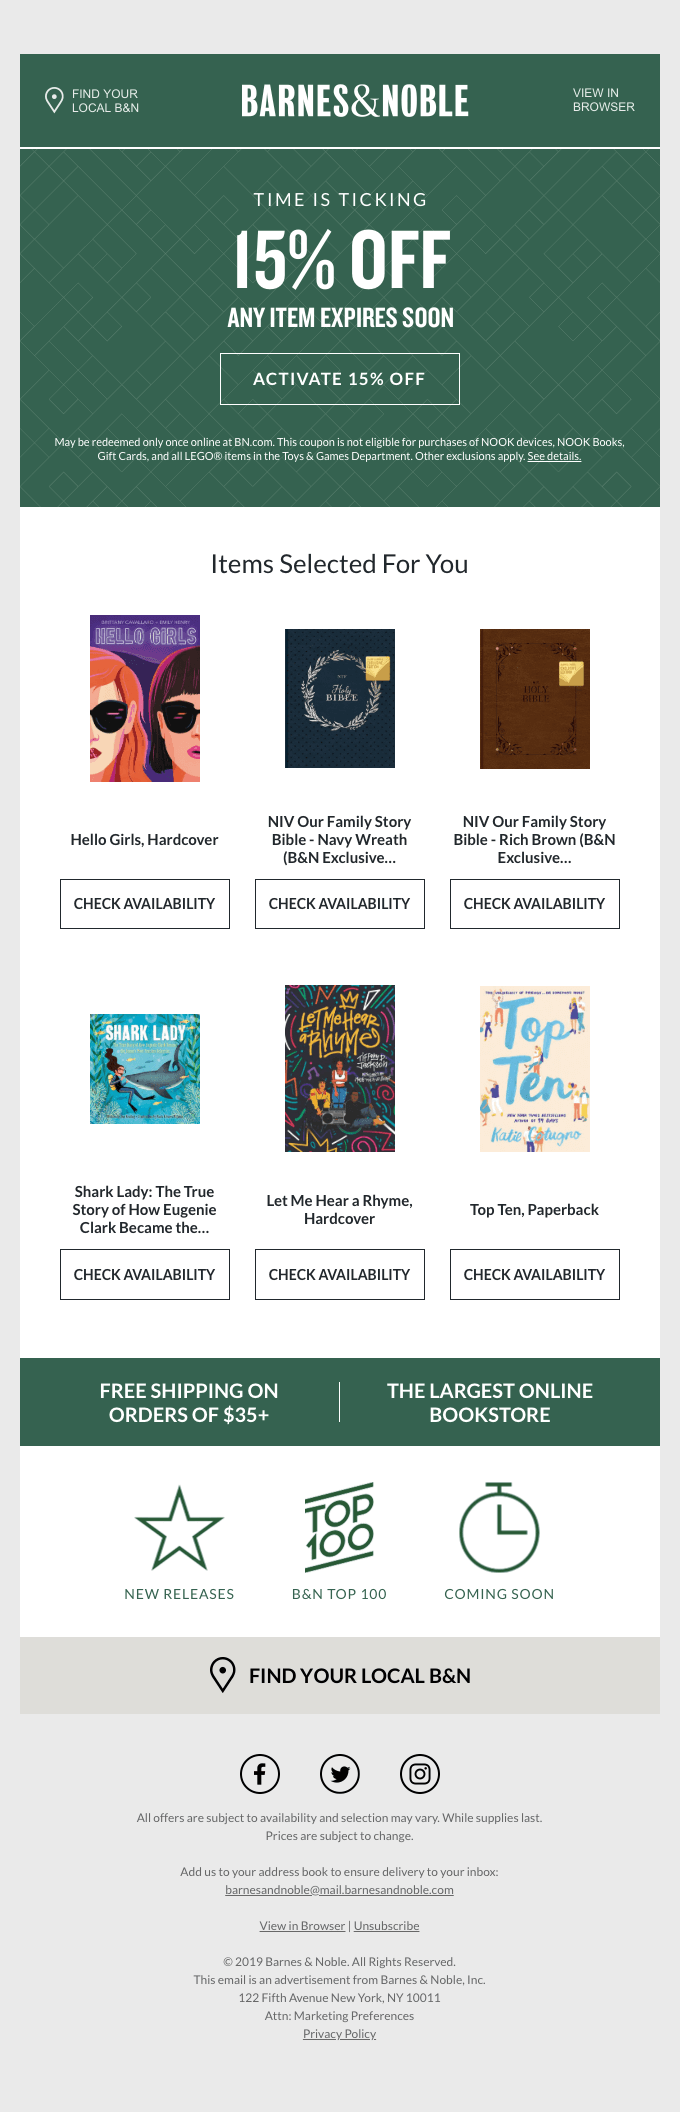 Special offer email with personalized suggestions from Barnes & Noble